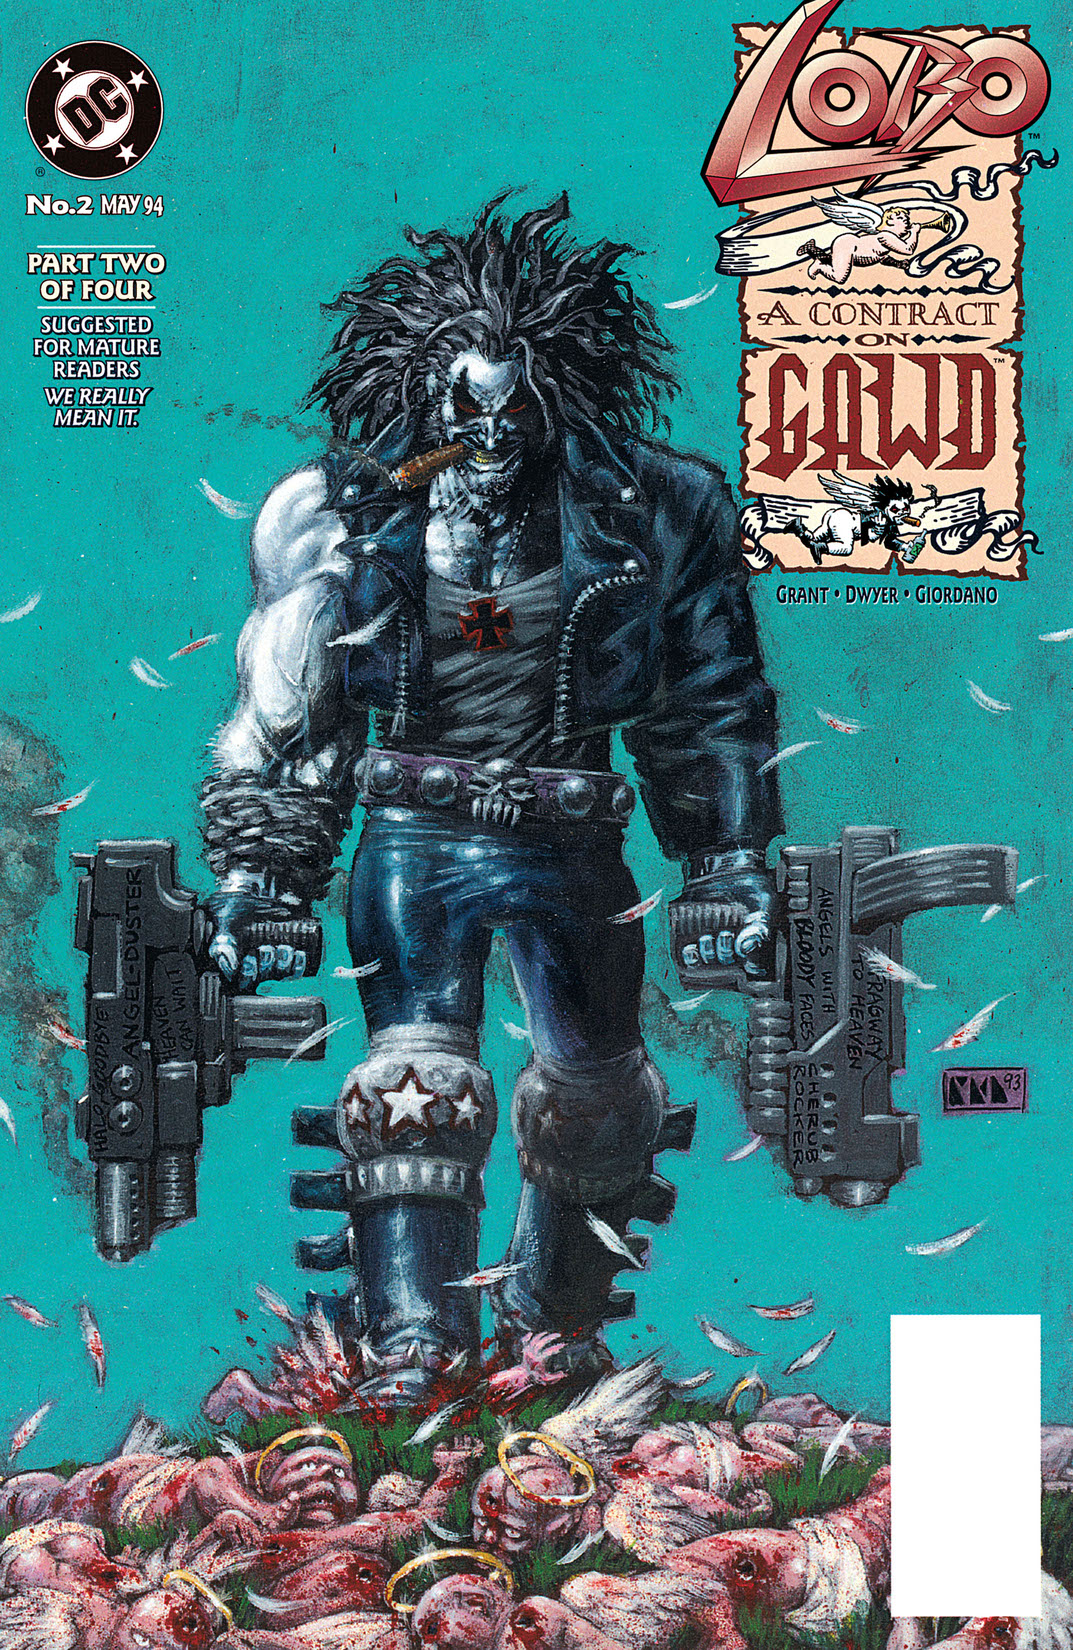 Lobo: A Contract on Gawd #2 preview images